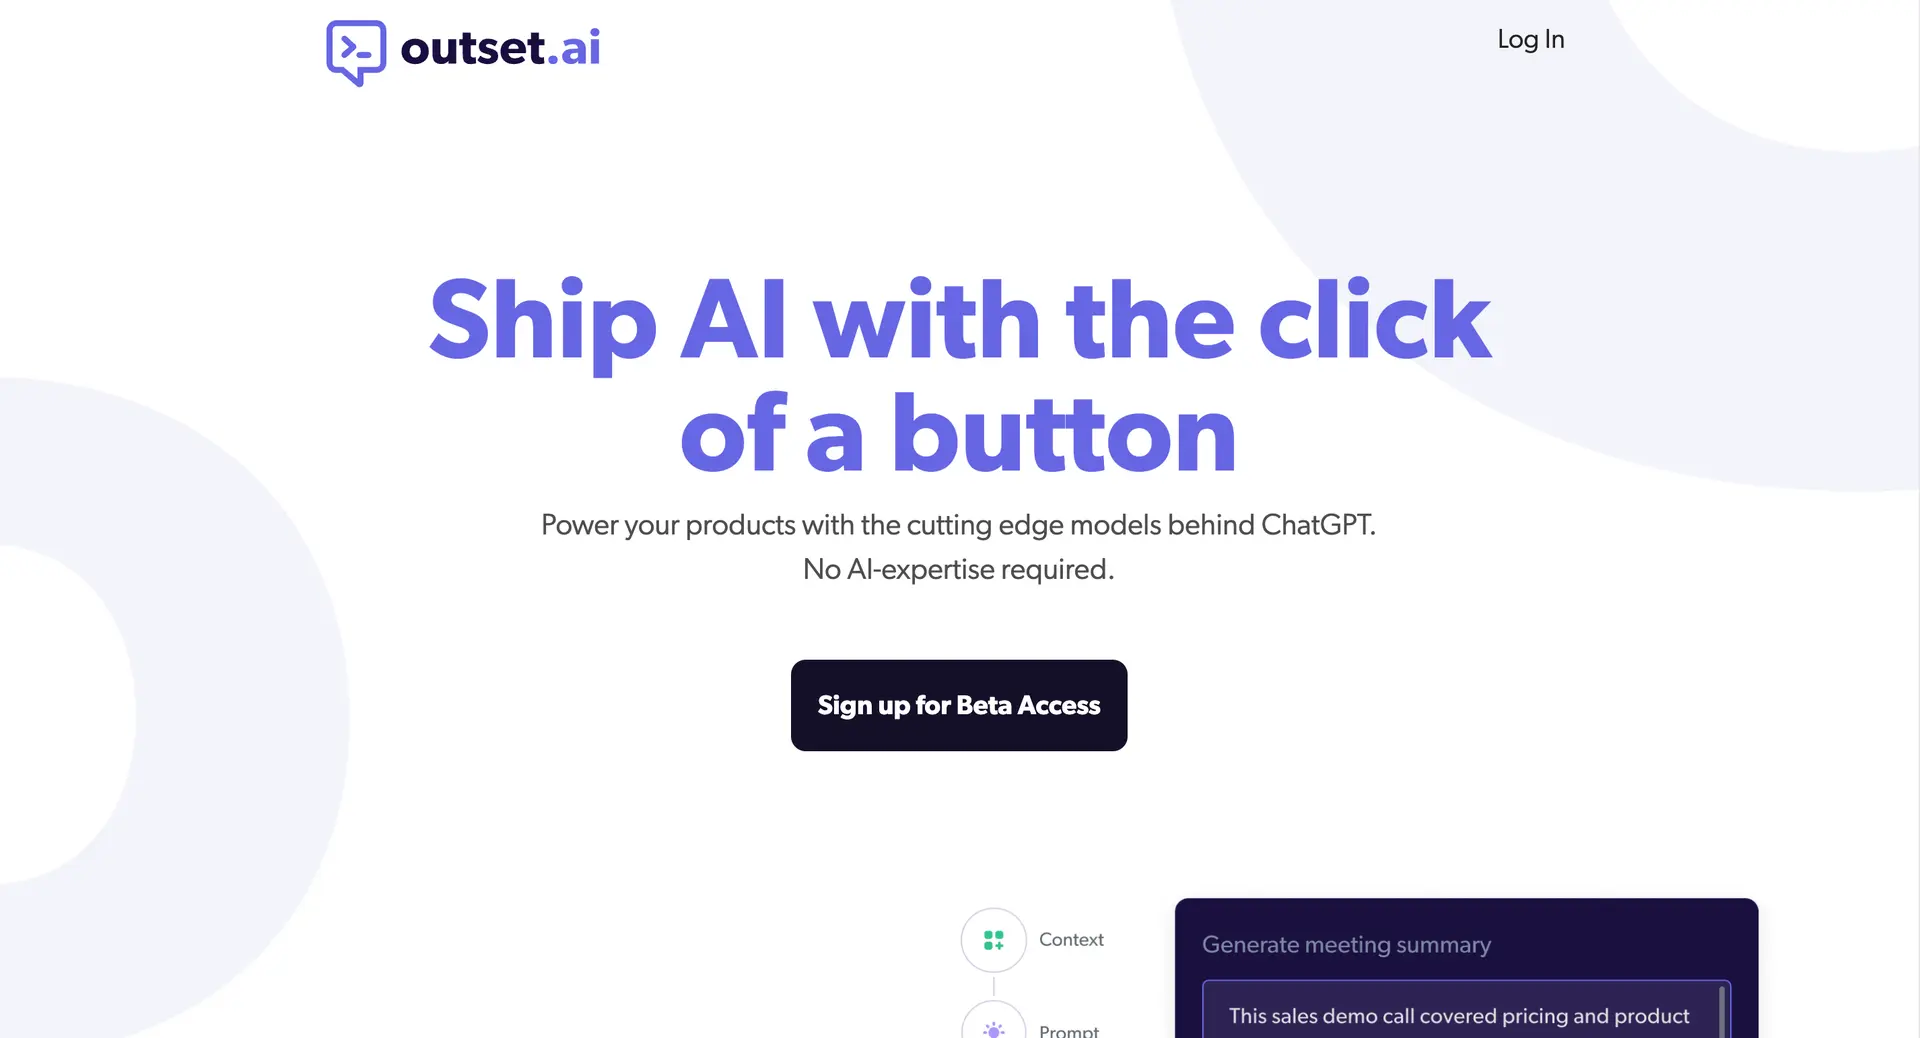 Outset.aiwebsite picture